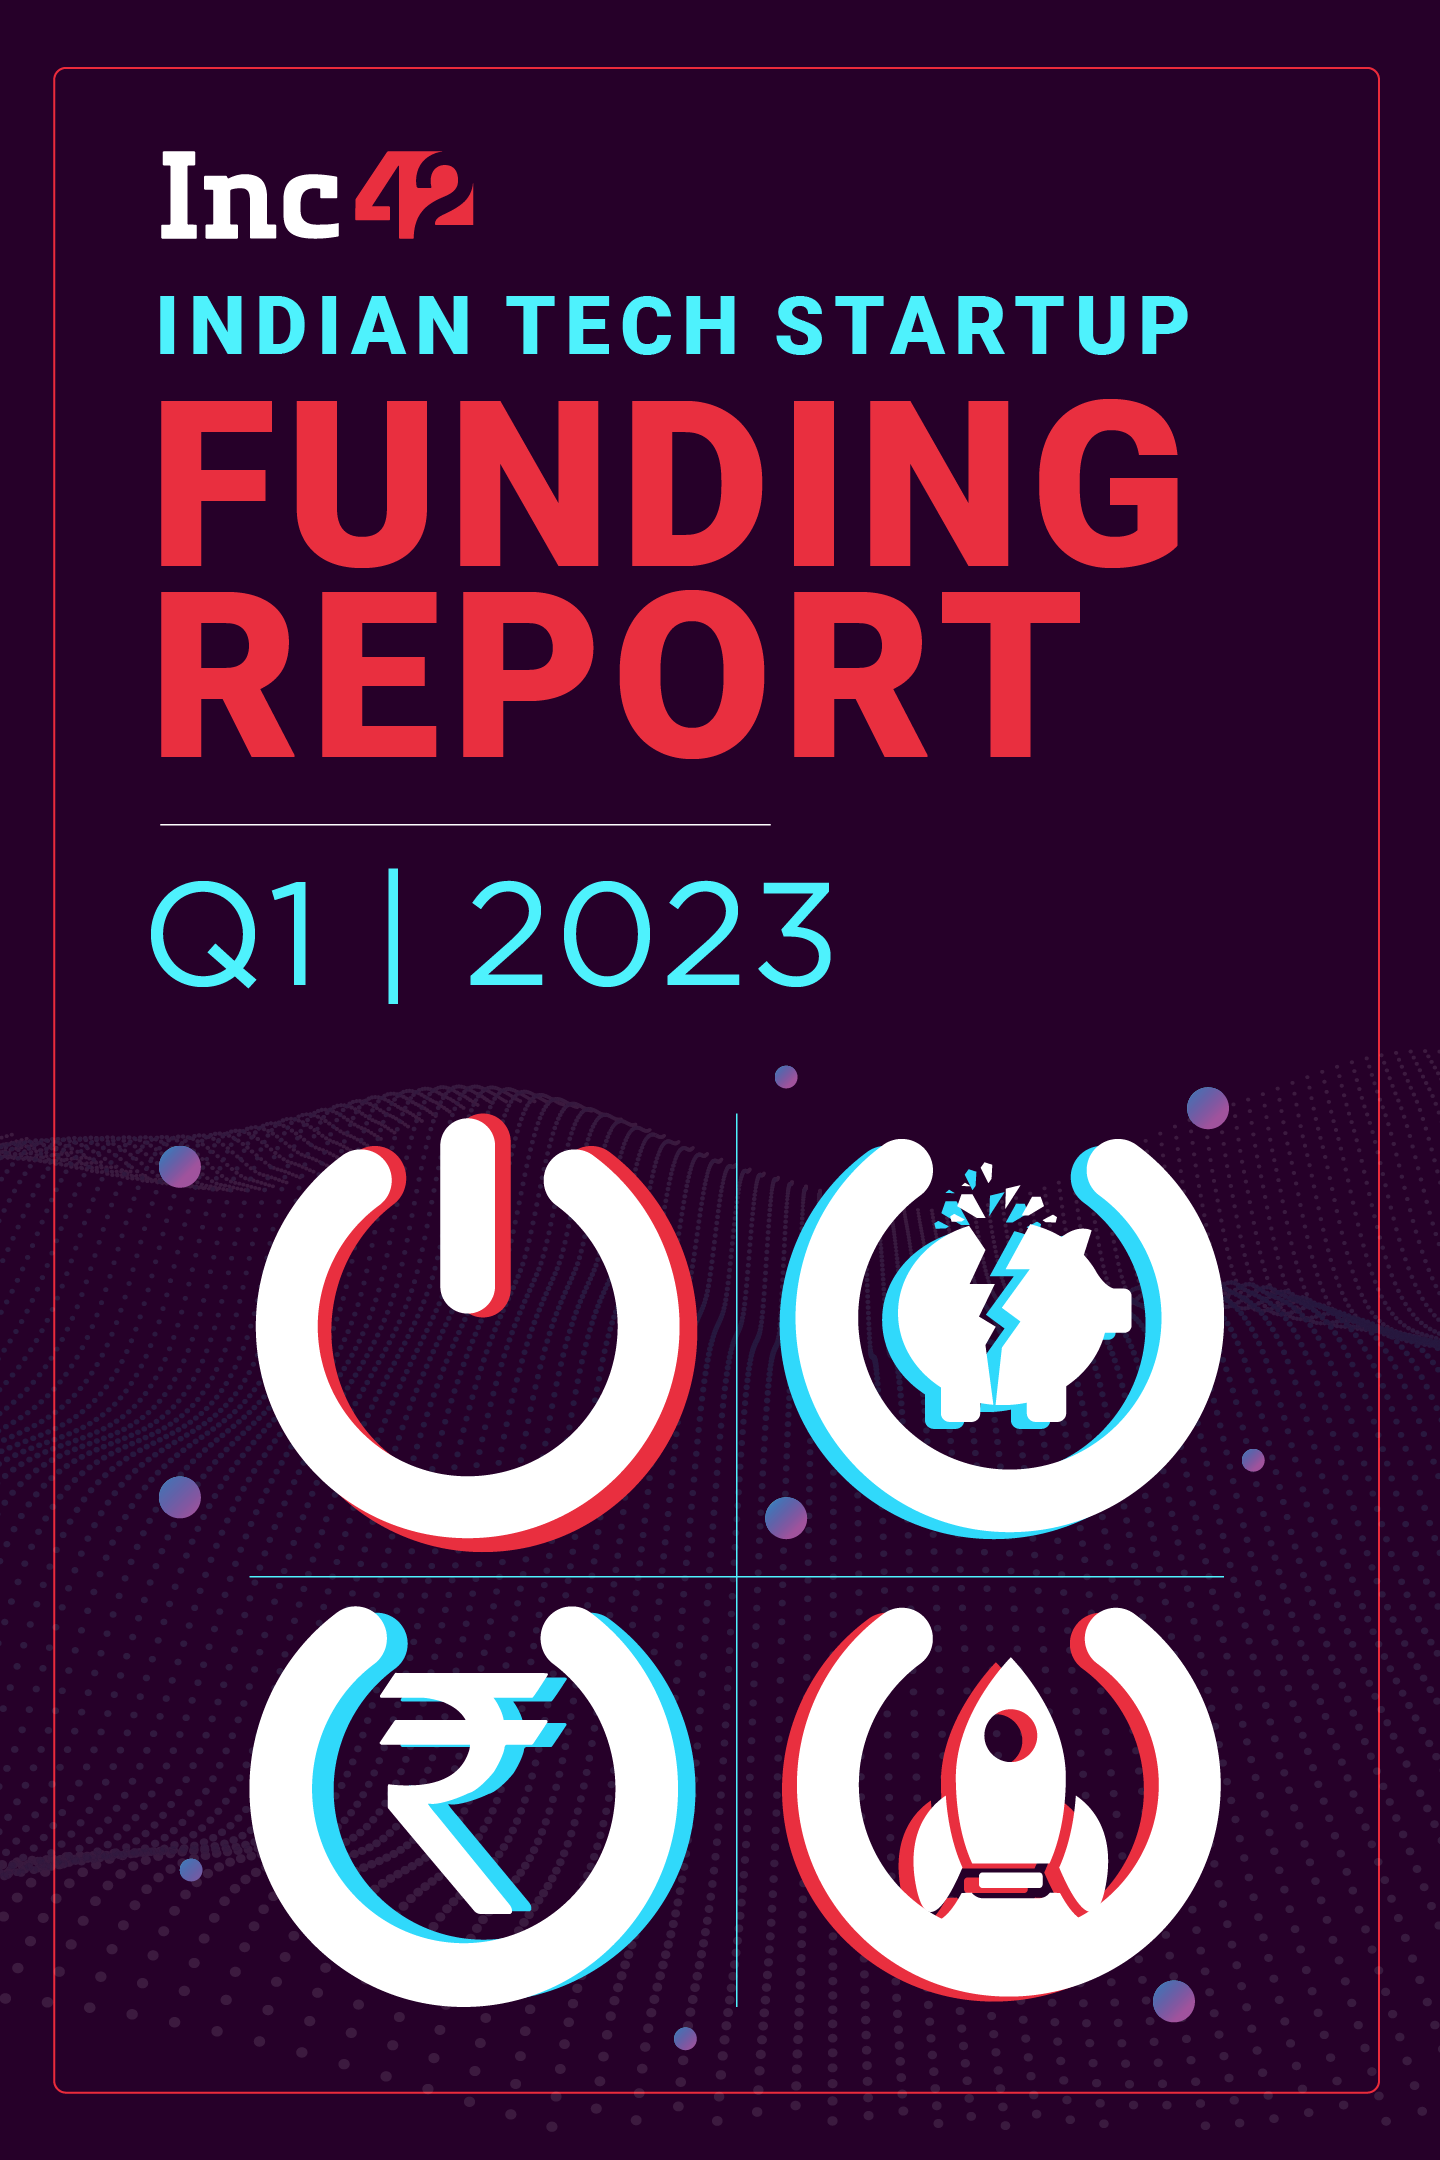 Indian Tech Startup Funding Report Q1 2023